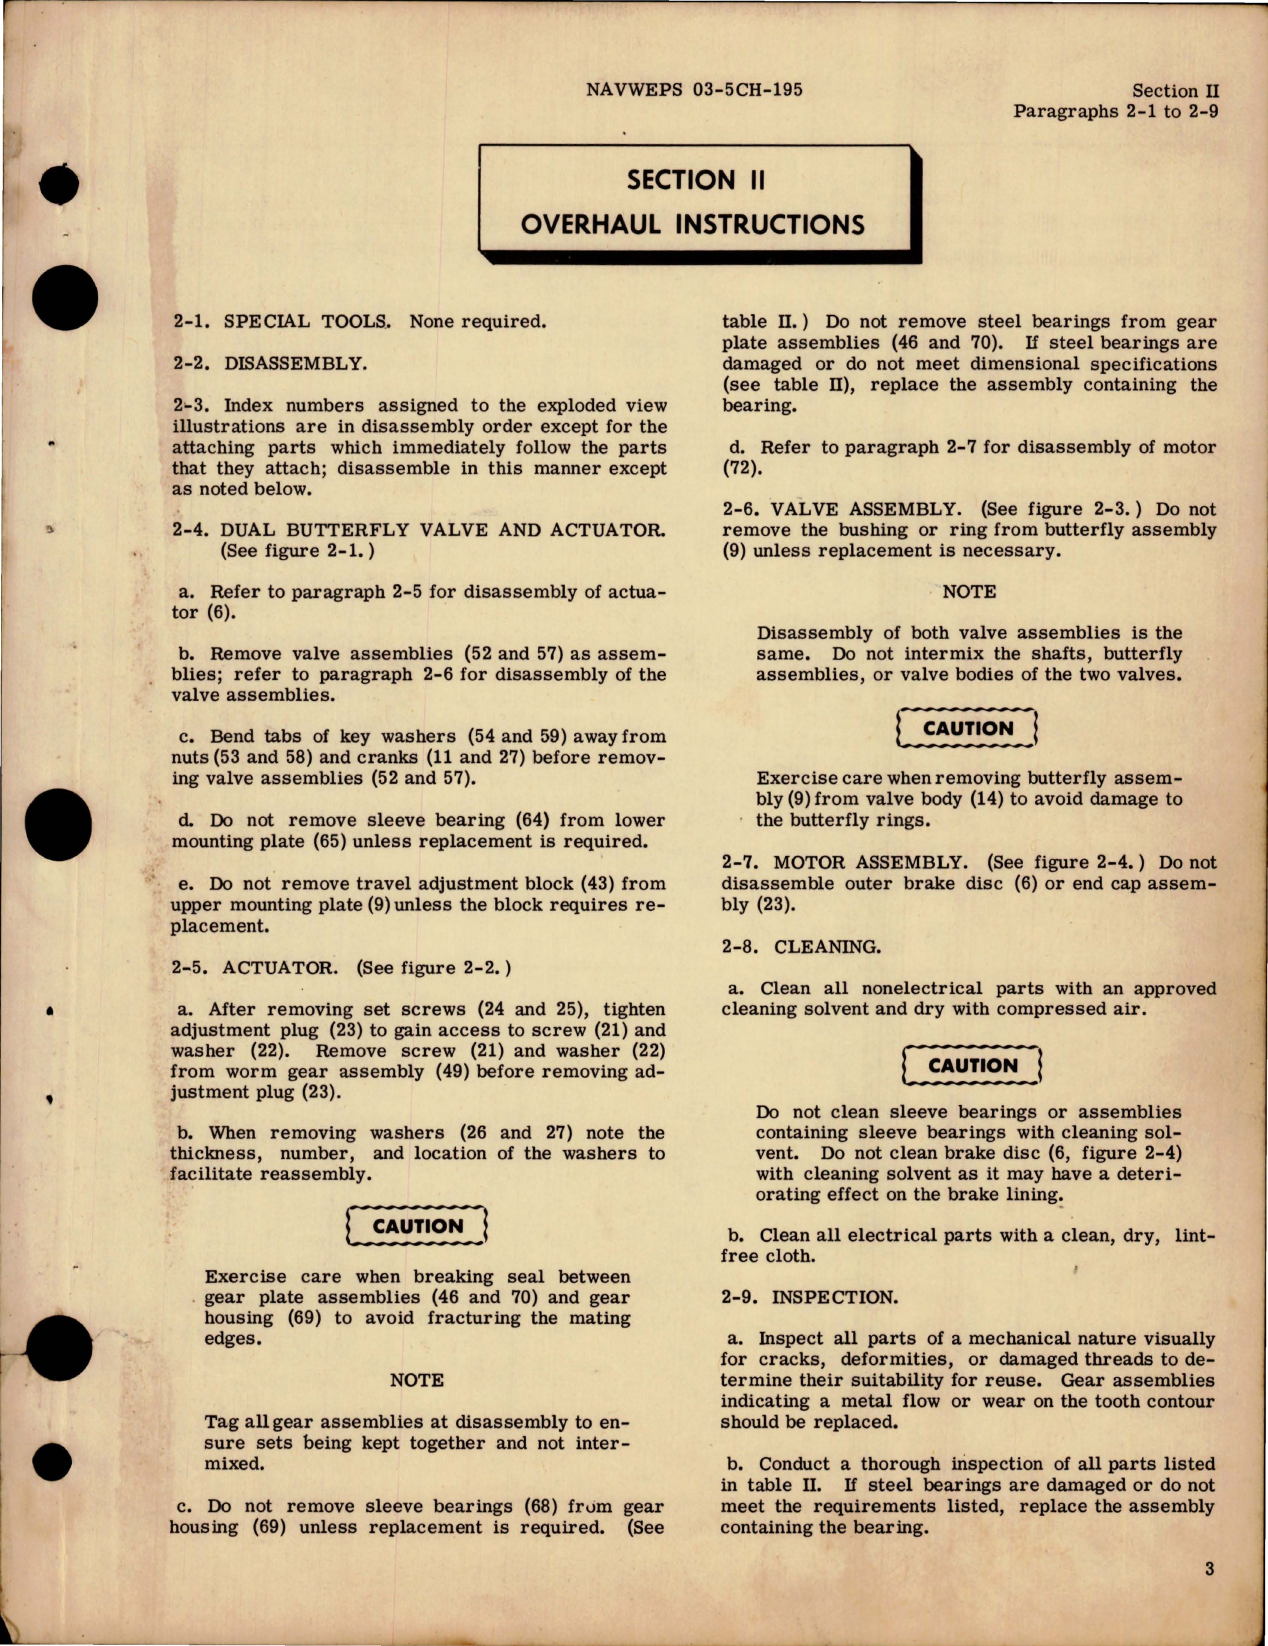 Sample page 7 from AirCorps Library document: Overhaul Instructions for Dual Valve and Actuator Assembly 